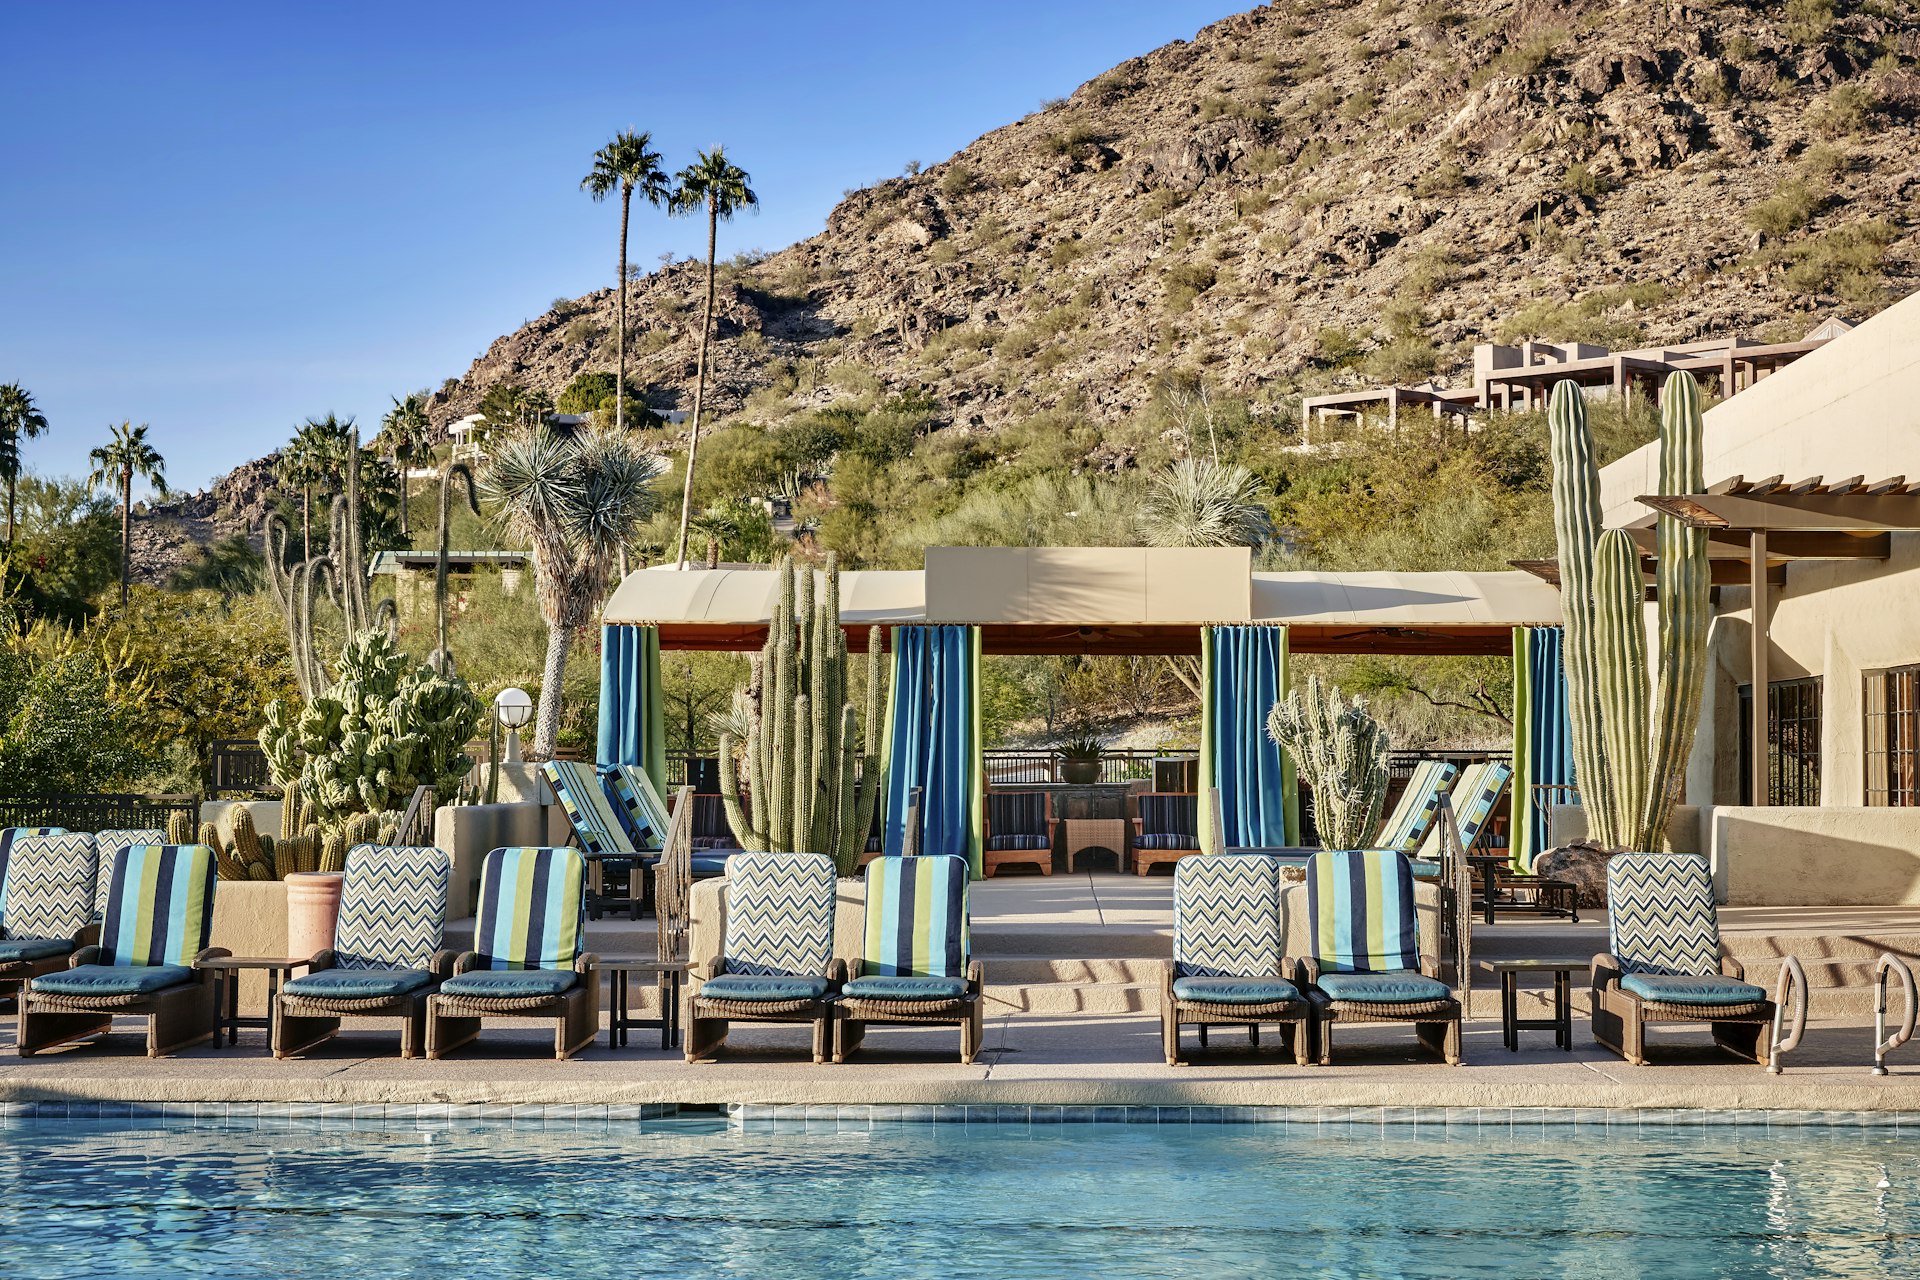 Sun loungers lined up alongside a pool. Cactuses decorate the poolside and hilly terrain stretches out beyond